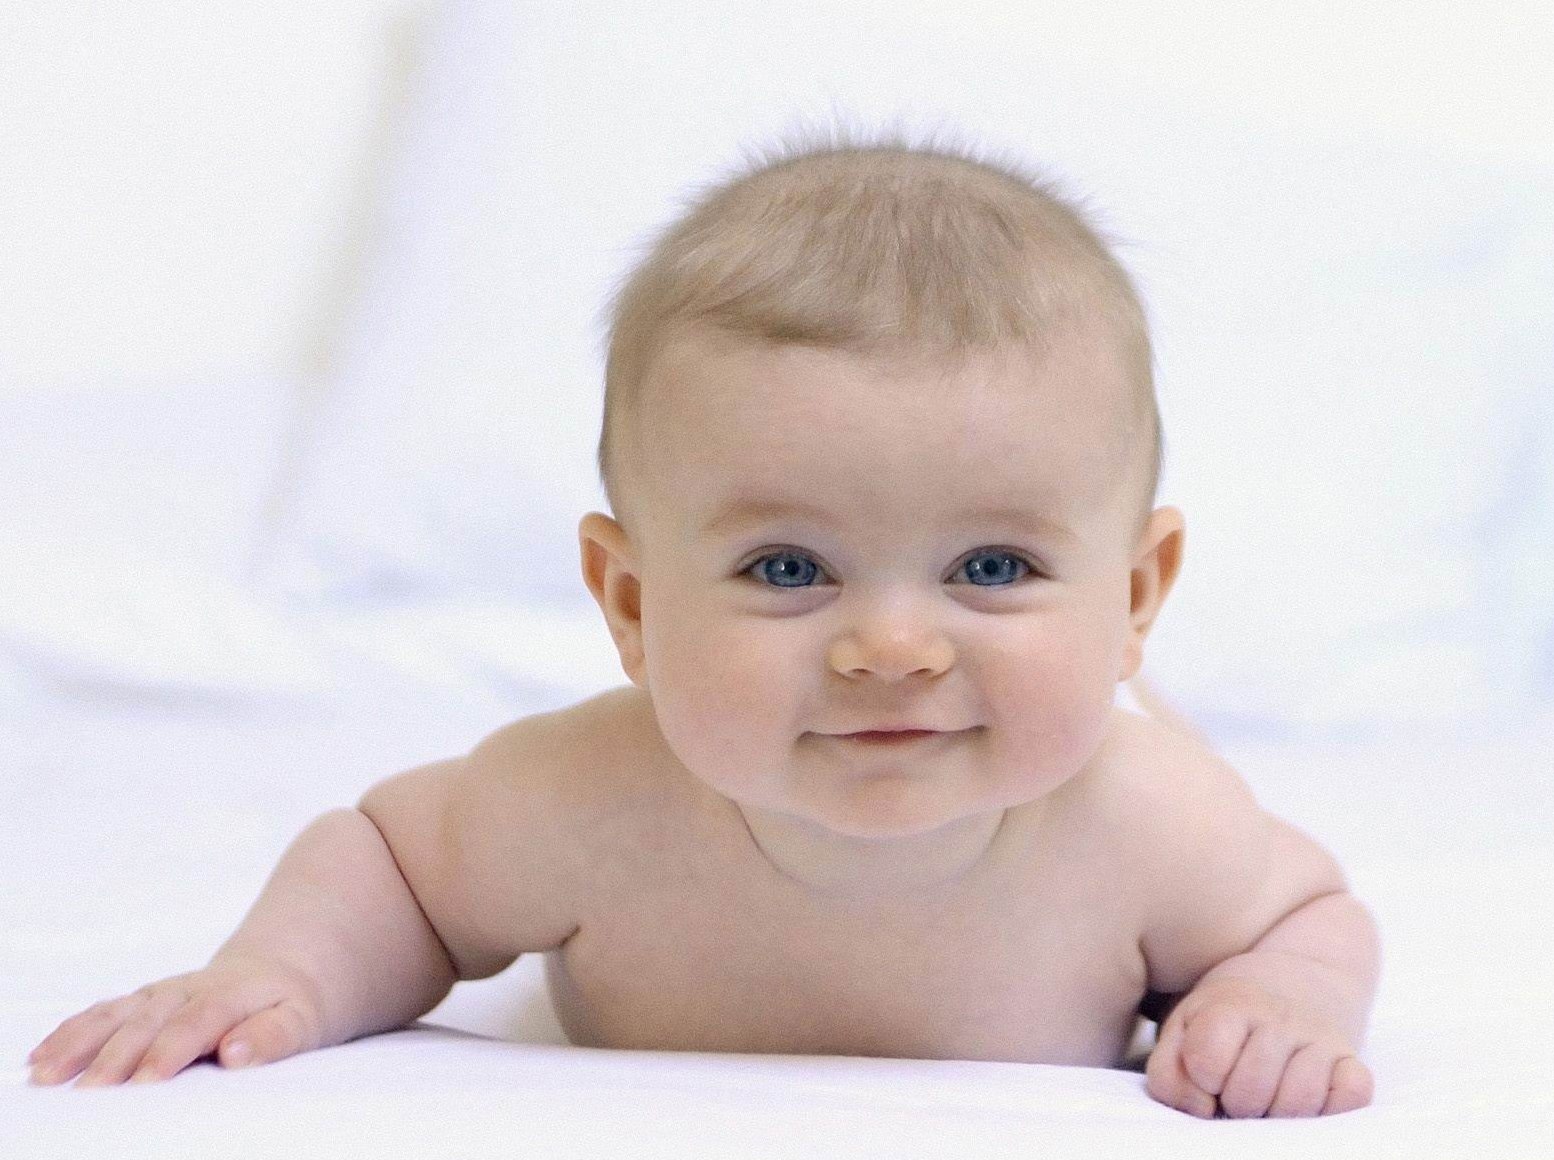 baby pictures cute babies pics cute kids wallpapers cute baby girls